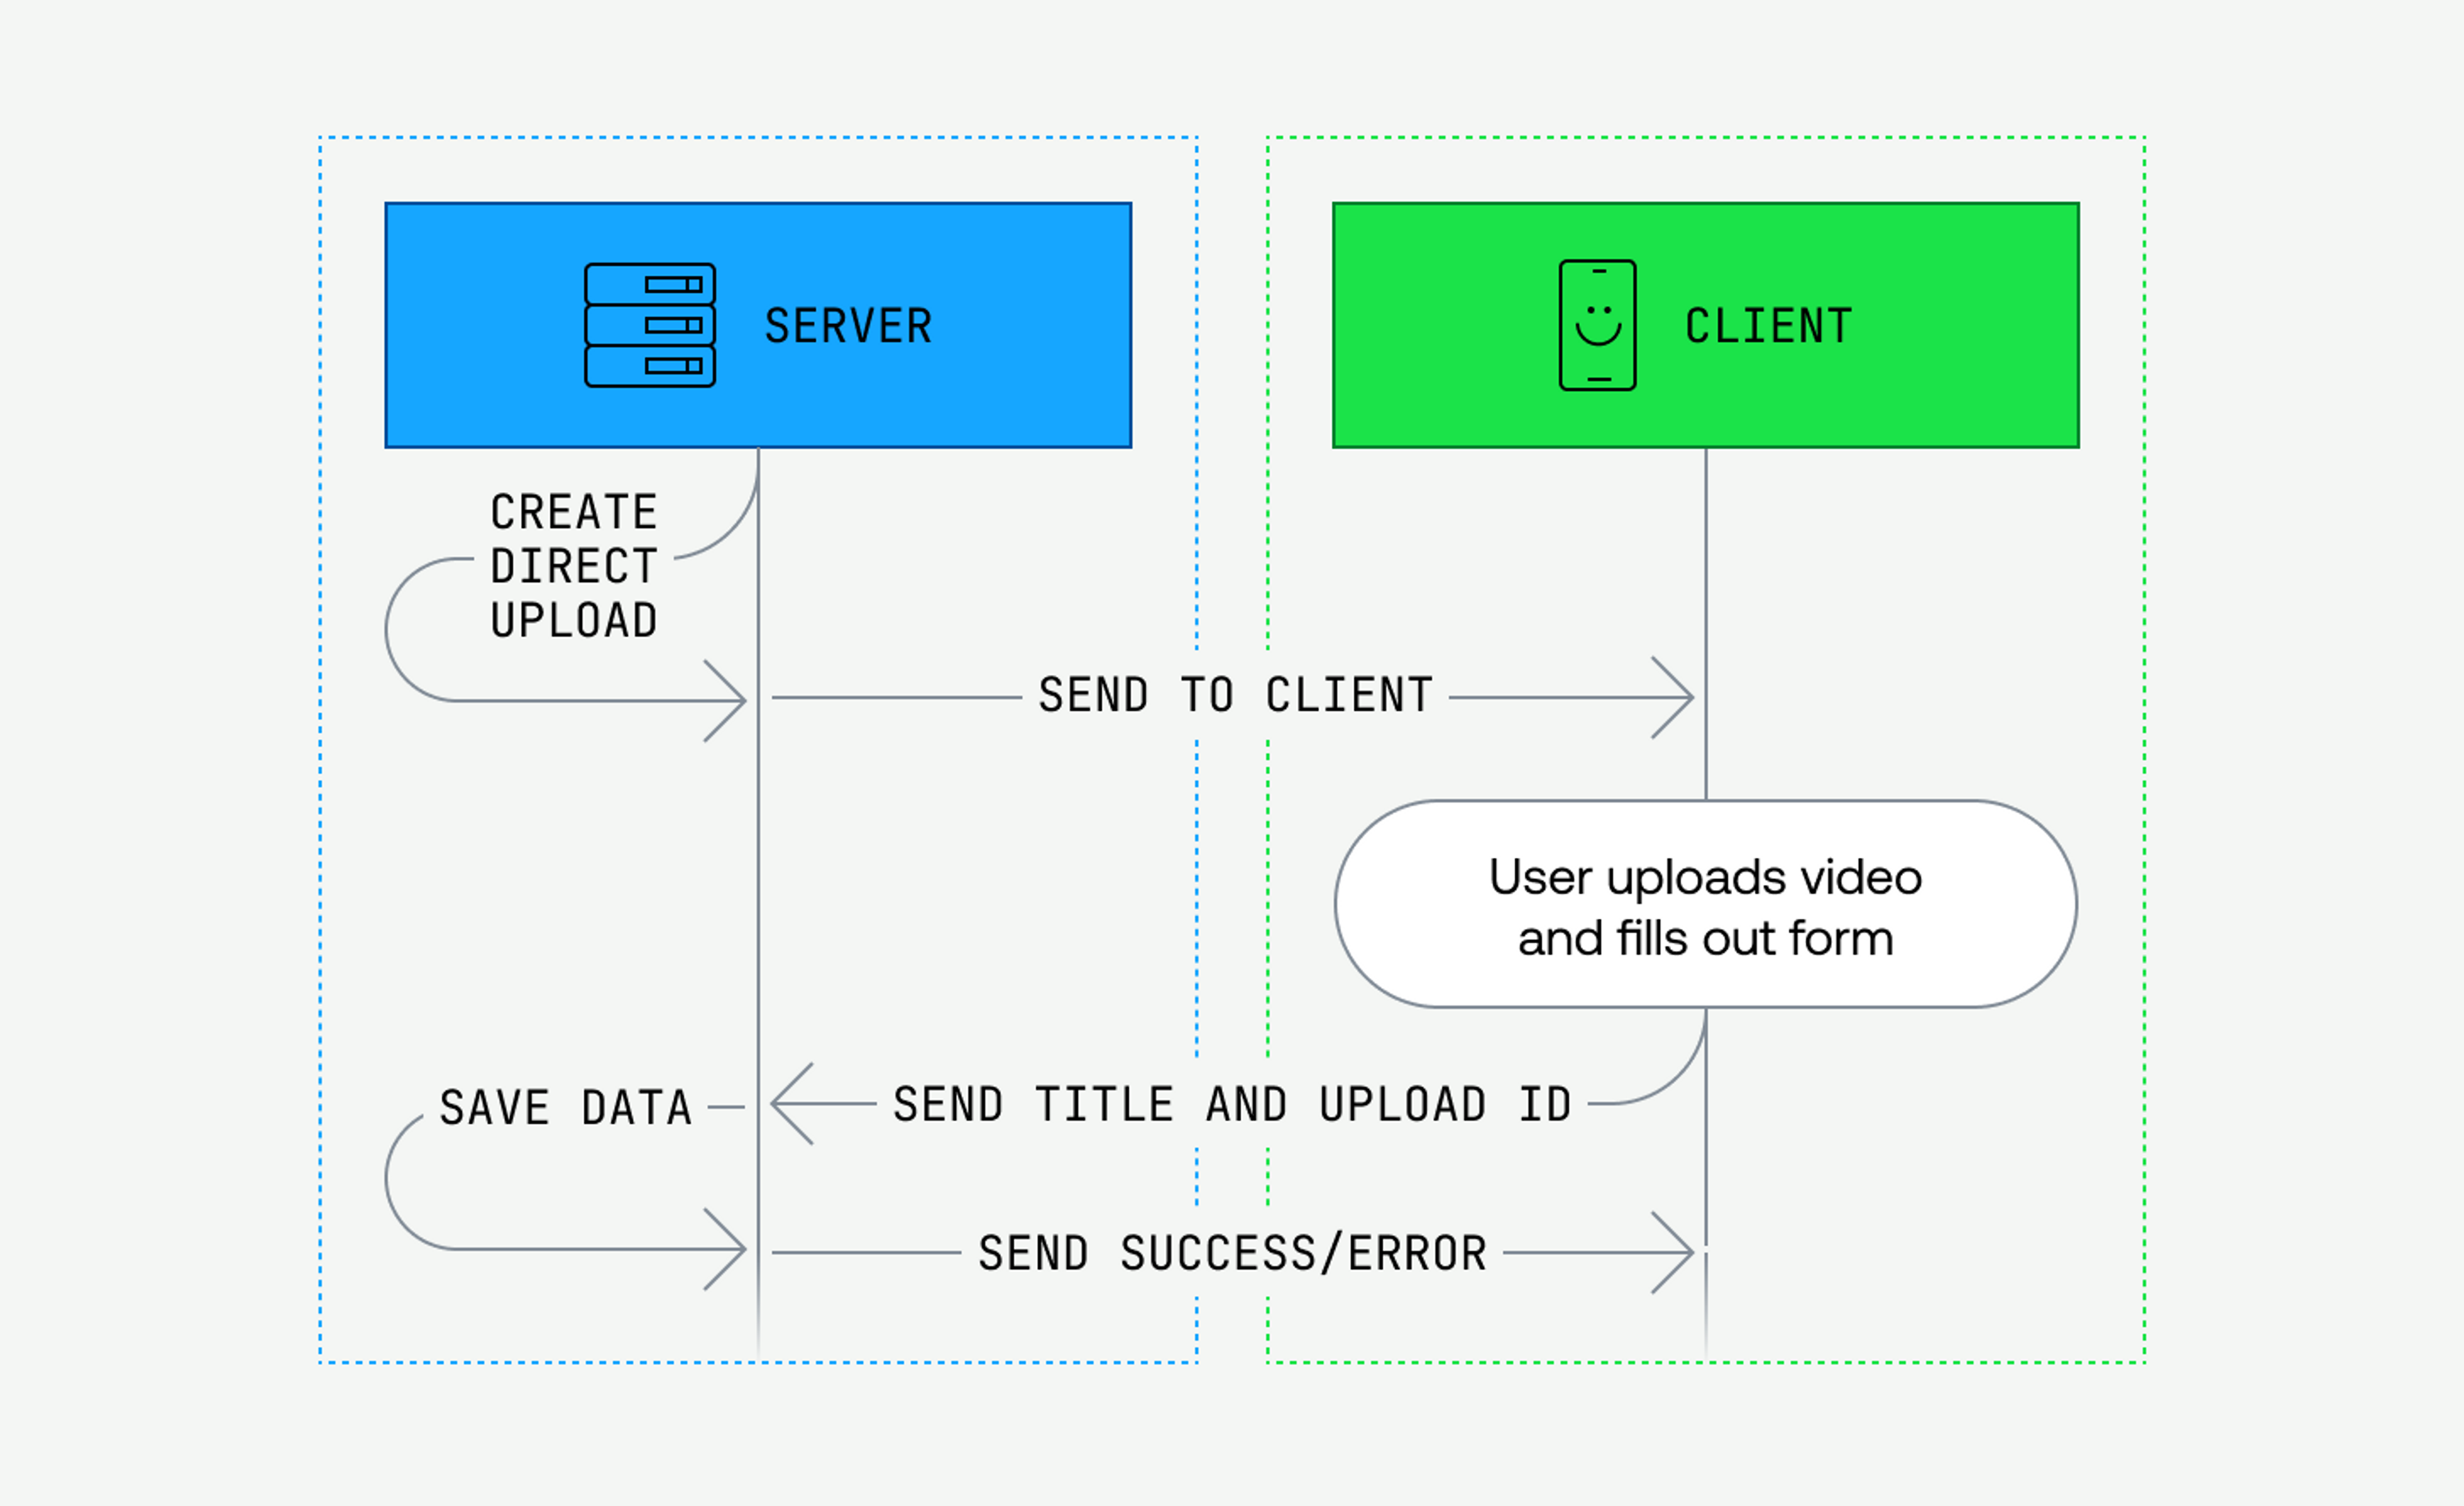 A diagram showing the interaction between client and server, as described in the next section